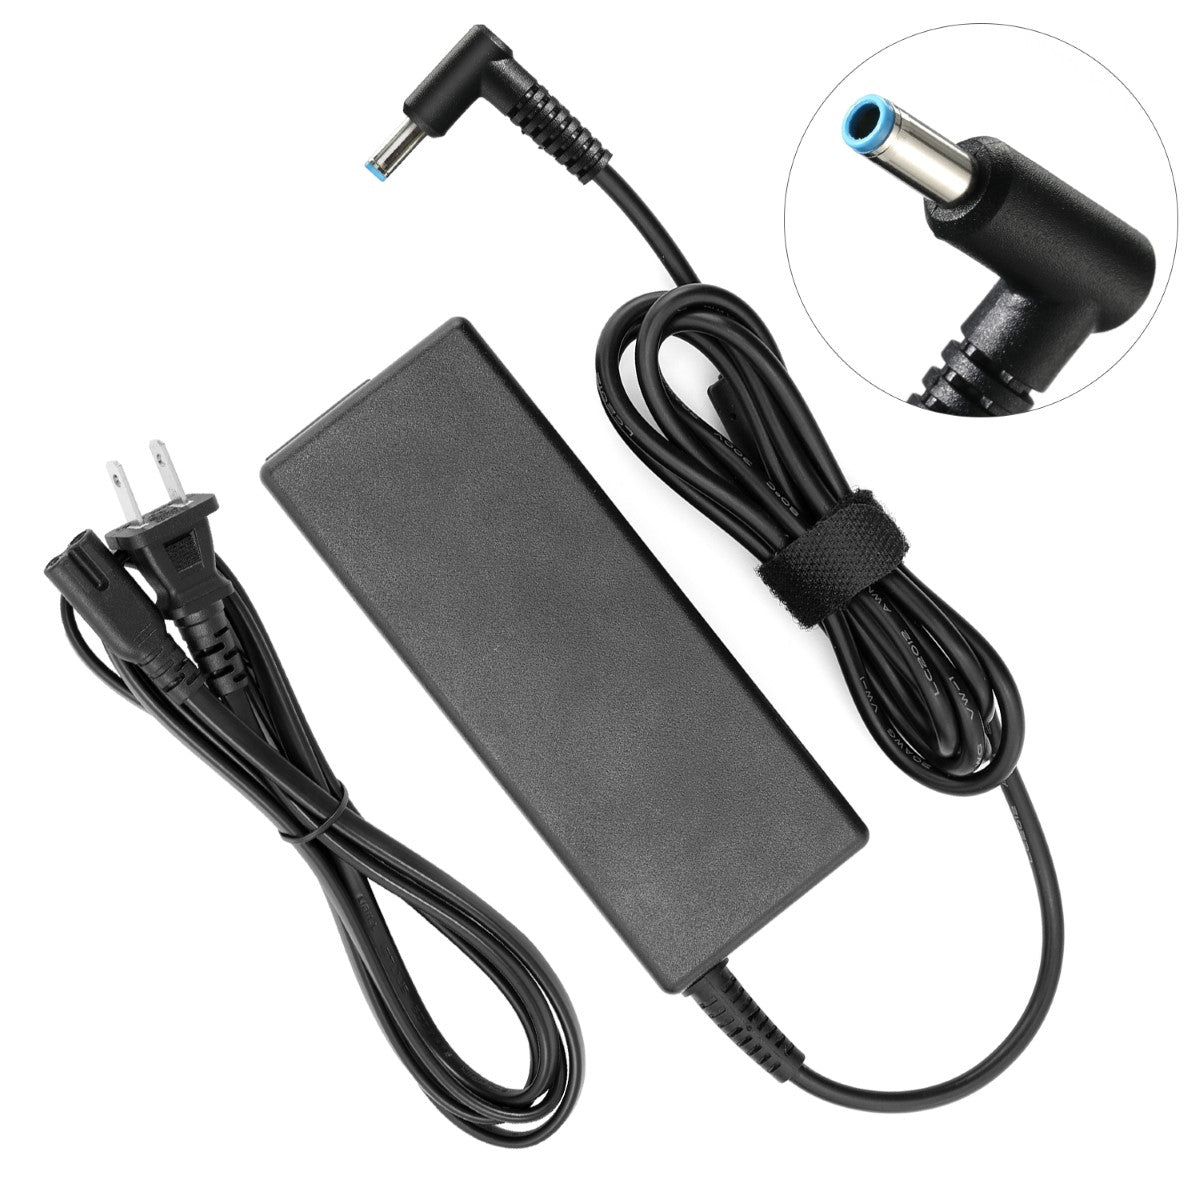 AC Adapter Charger for hp Envy Touchsmart 15-k081nr Notebook.